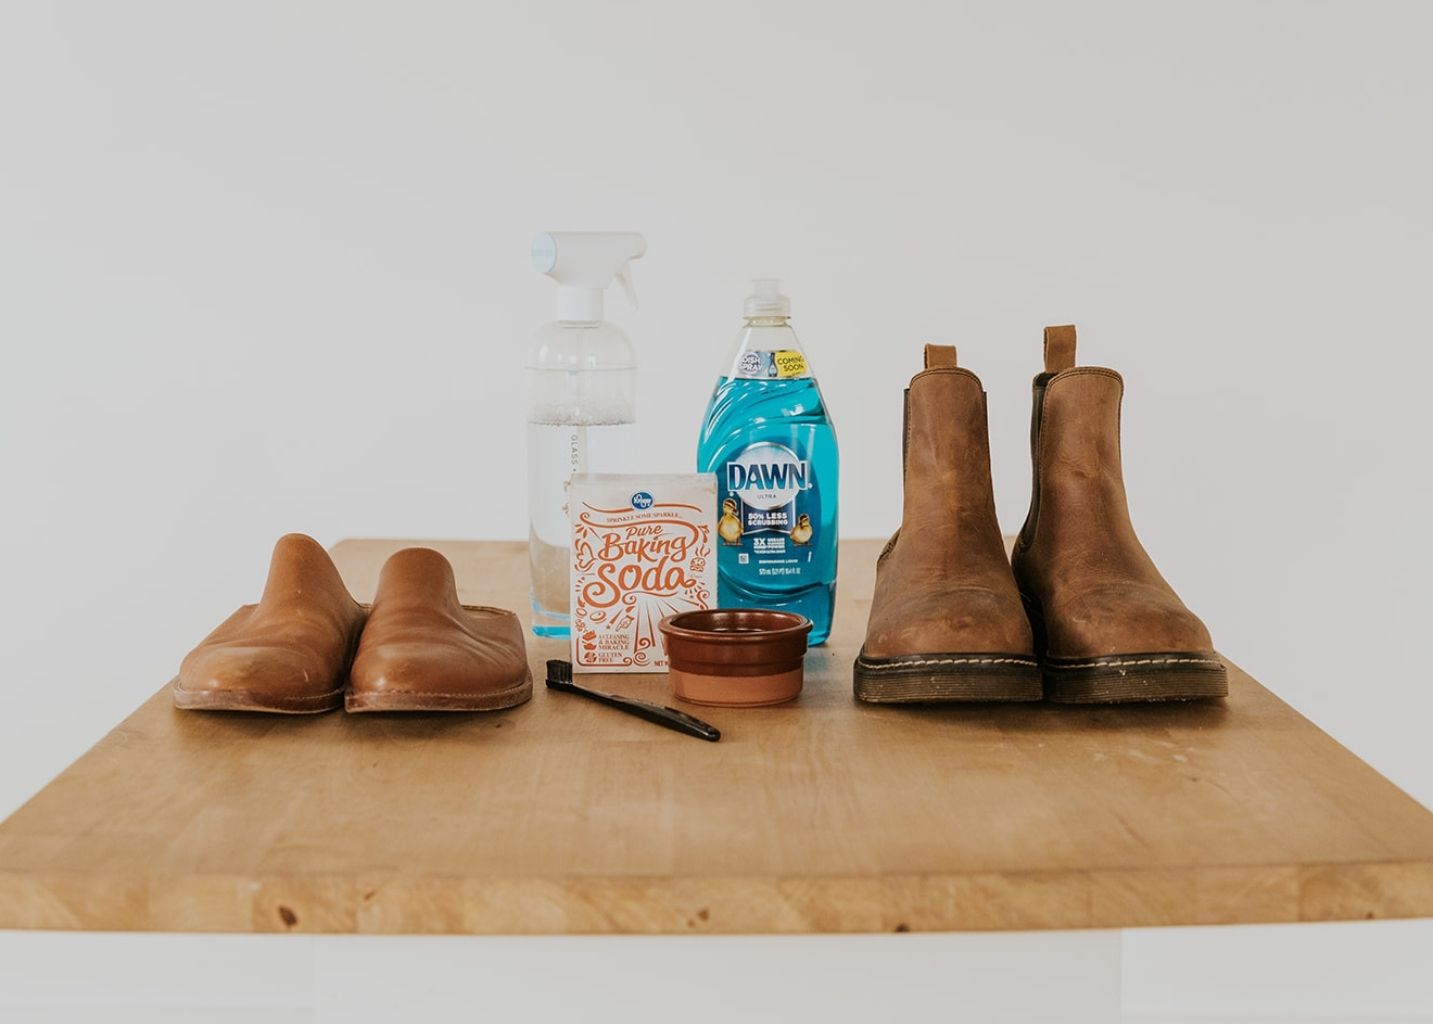 How to Clean Leather Shoes and Boots